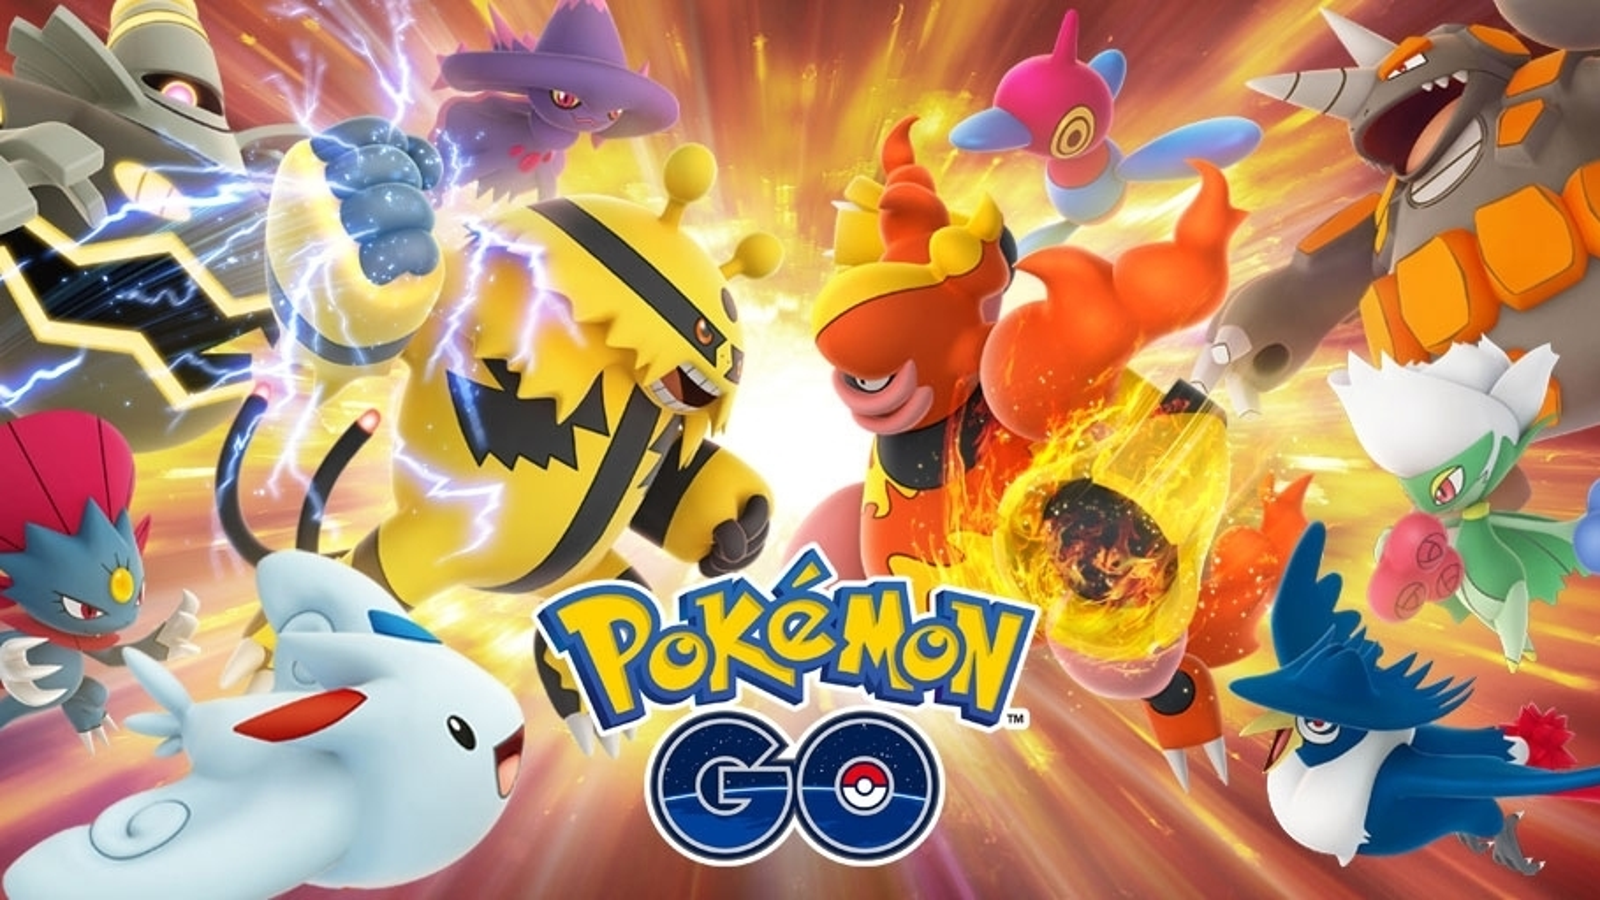 Pokemon Go Battle League is getting a leaderboard and Marill event